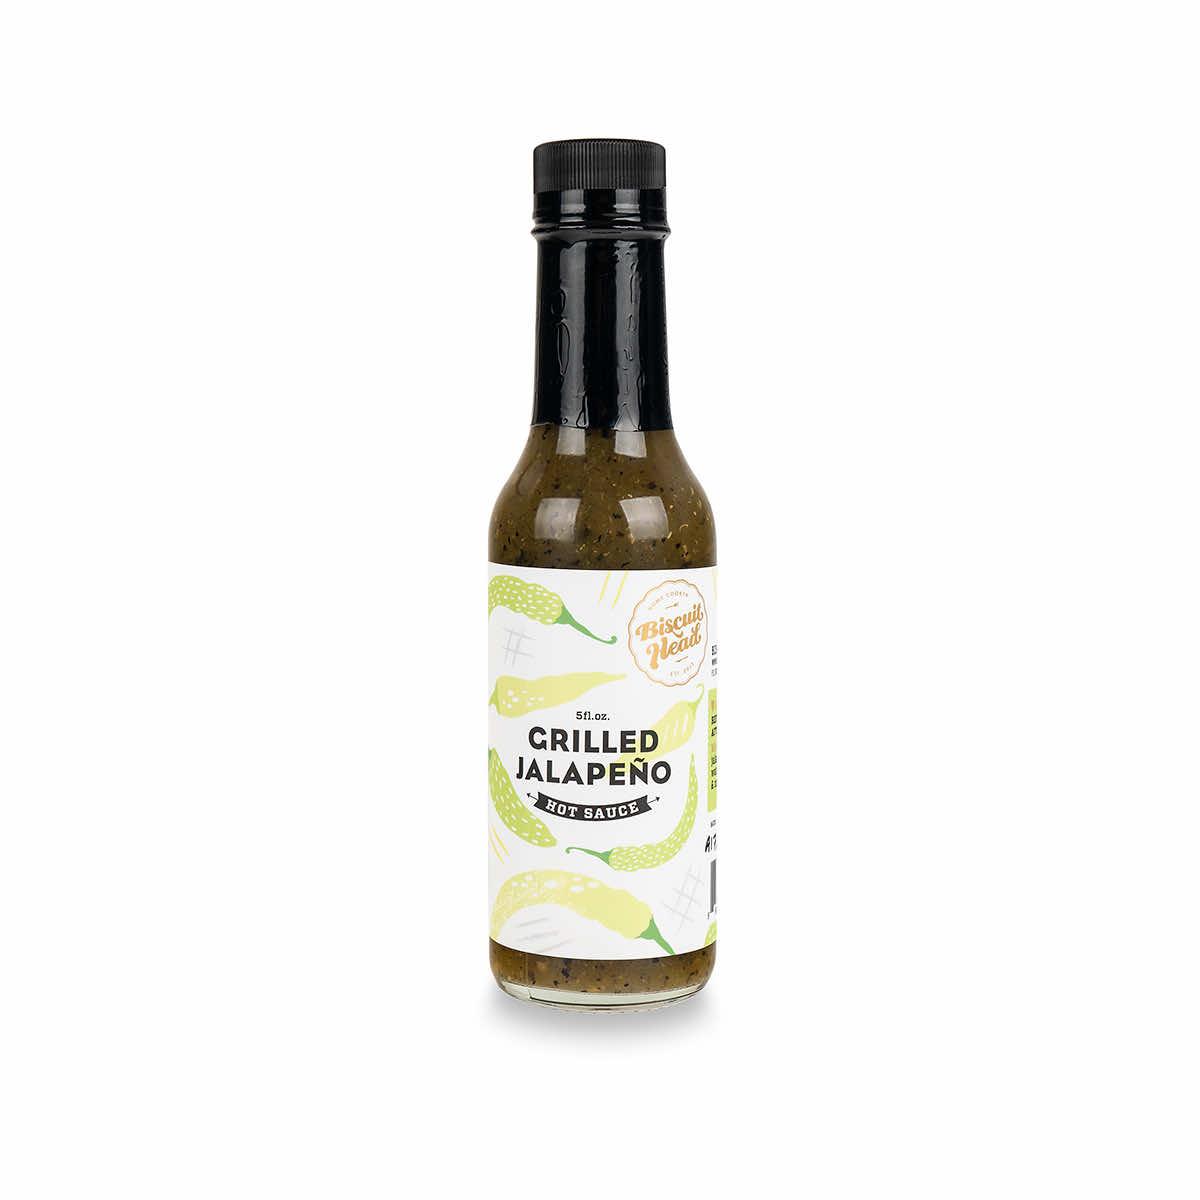  Grilled Jalapeno Hot Sauce